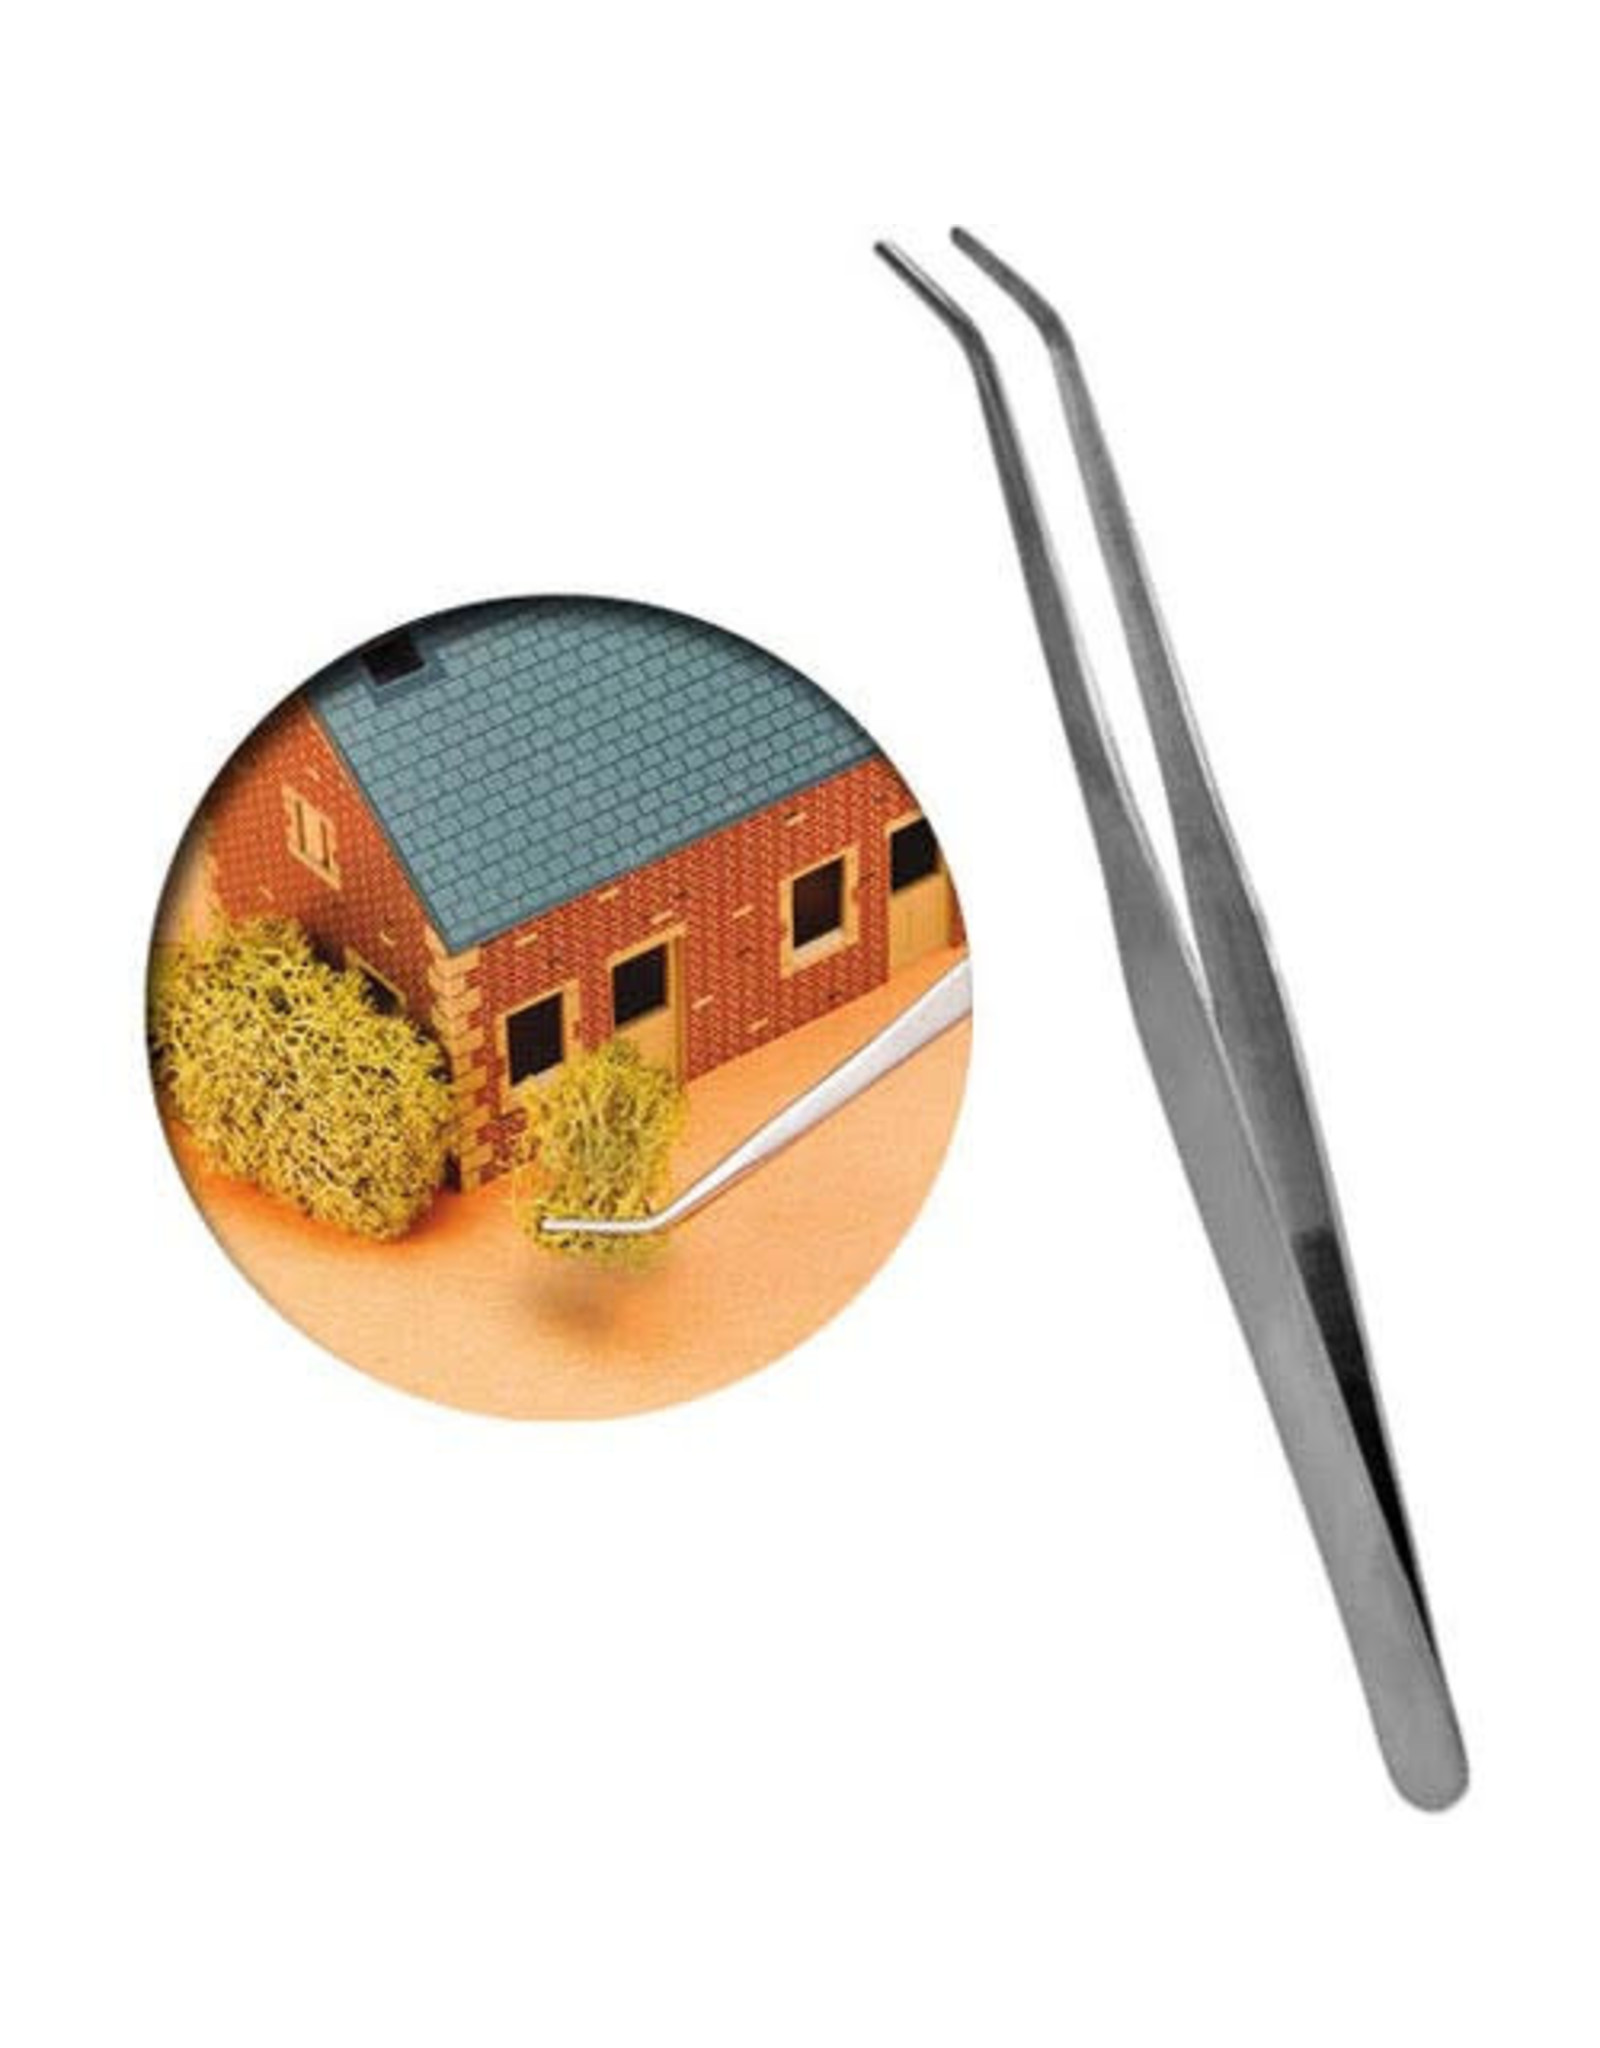 Vallejo Tool: Strong Curved Stainless Steel Tweezers (175mm)